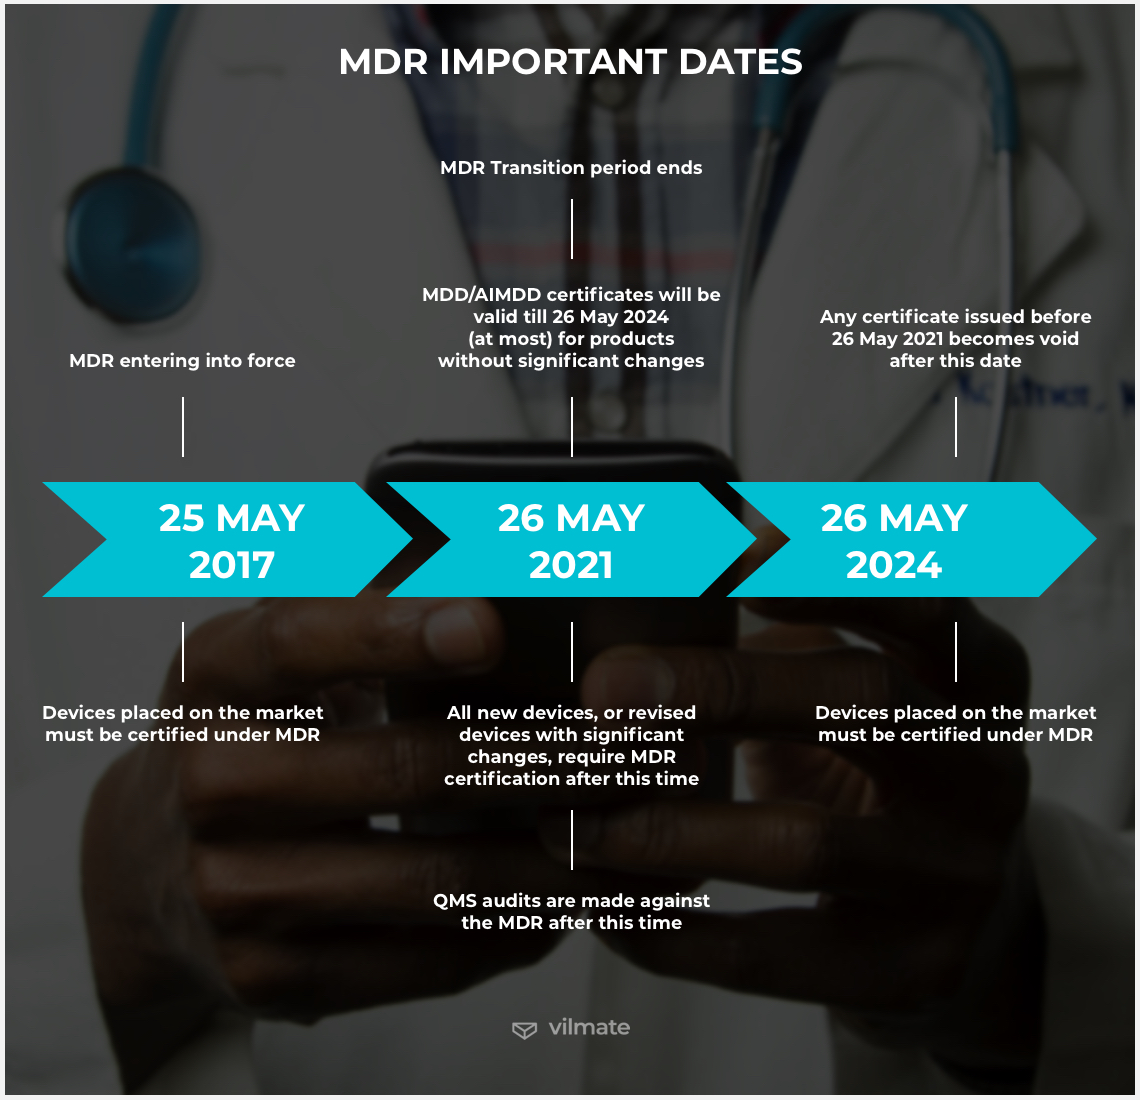 MDR important dates